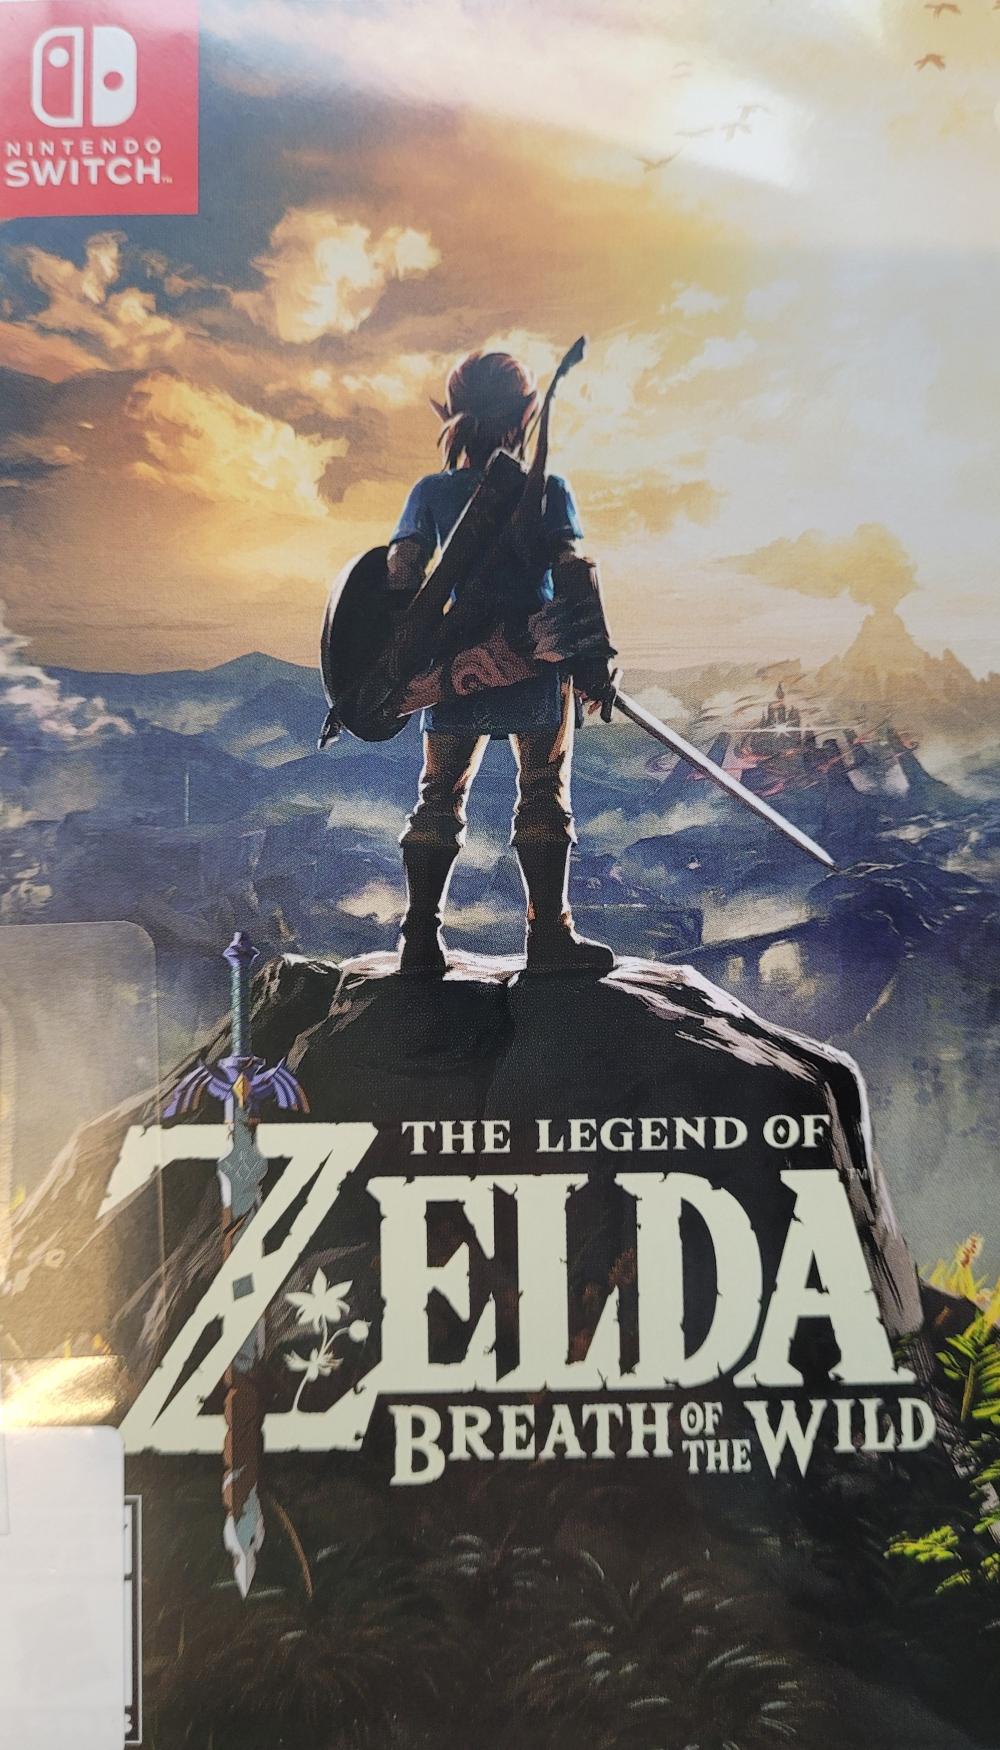 Zelda Breath of the Wild Game Cover